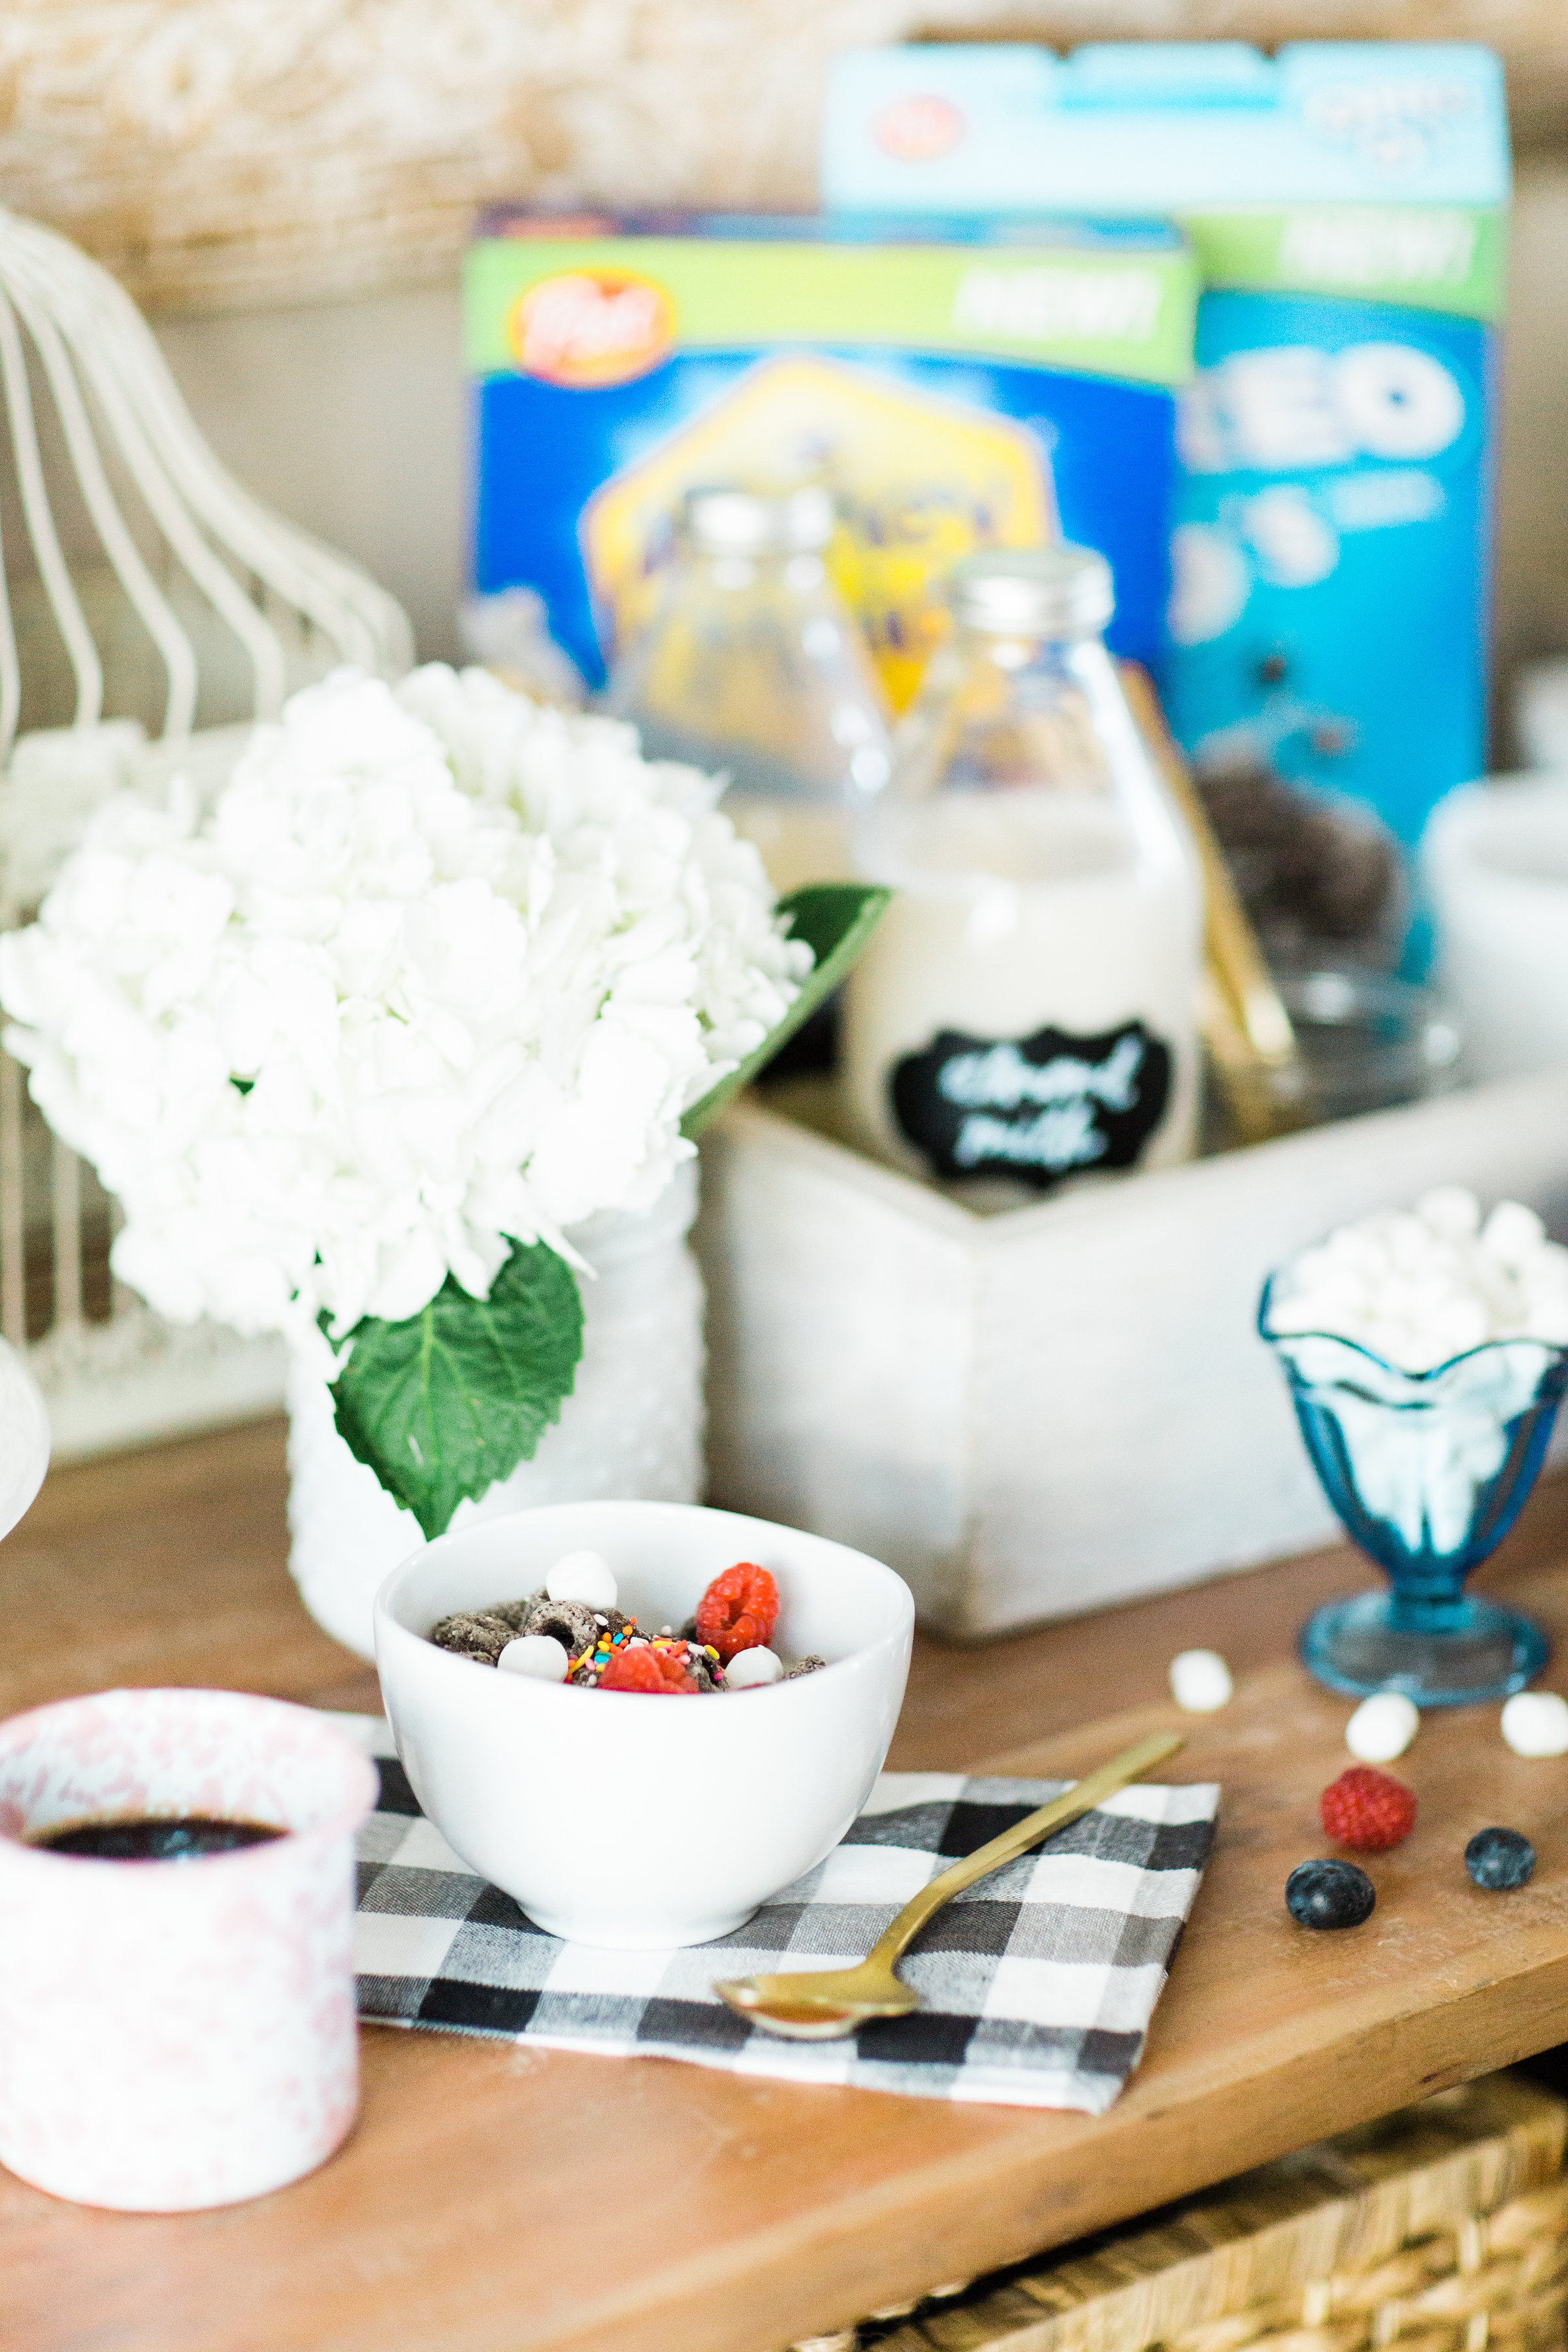 Looking for a unique and easy party dessert station? We're showing you how to put together a DIY retro cereal bar; perfect for a festive and memorable brunch, throwback party, pajama-themed soirée, or sleepover for your kids and their friends! Click through for the details. #brunch #brunchideas #cerealbar #cerealstation #party #partyideas #sleepoverparty #pajamaparty | glitterinc.com | @glitterinc